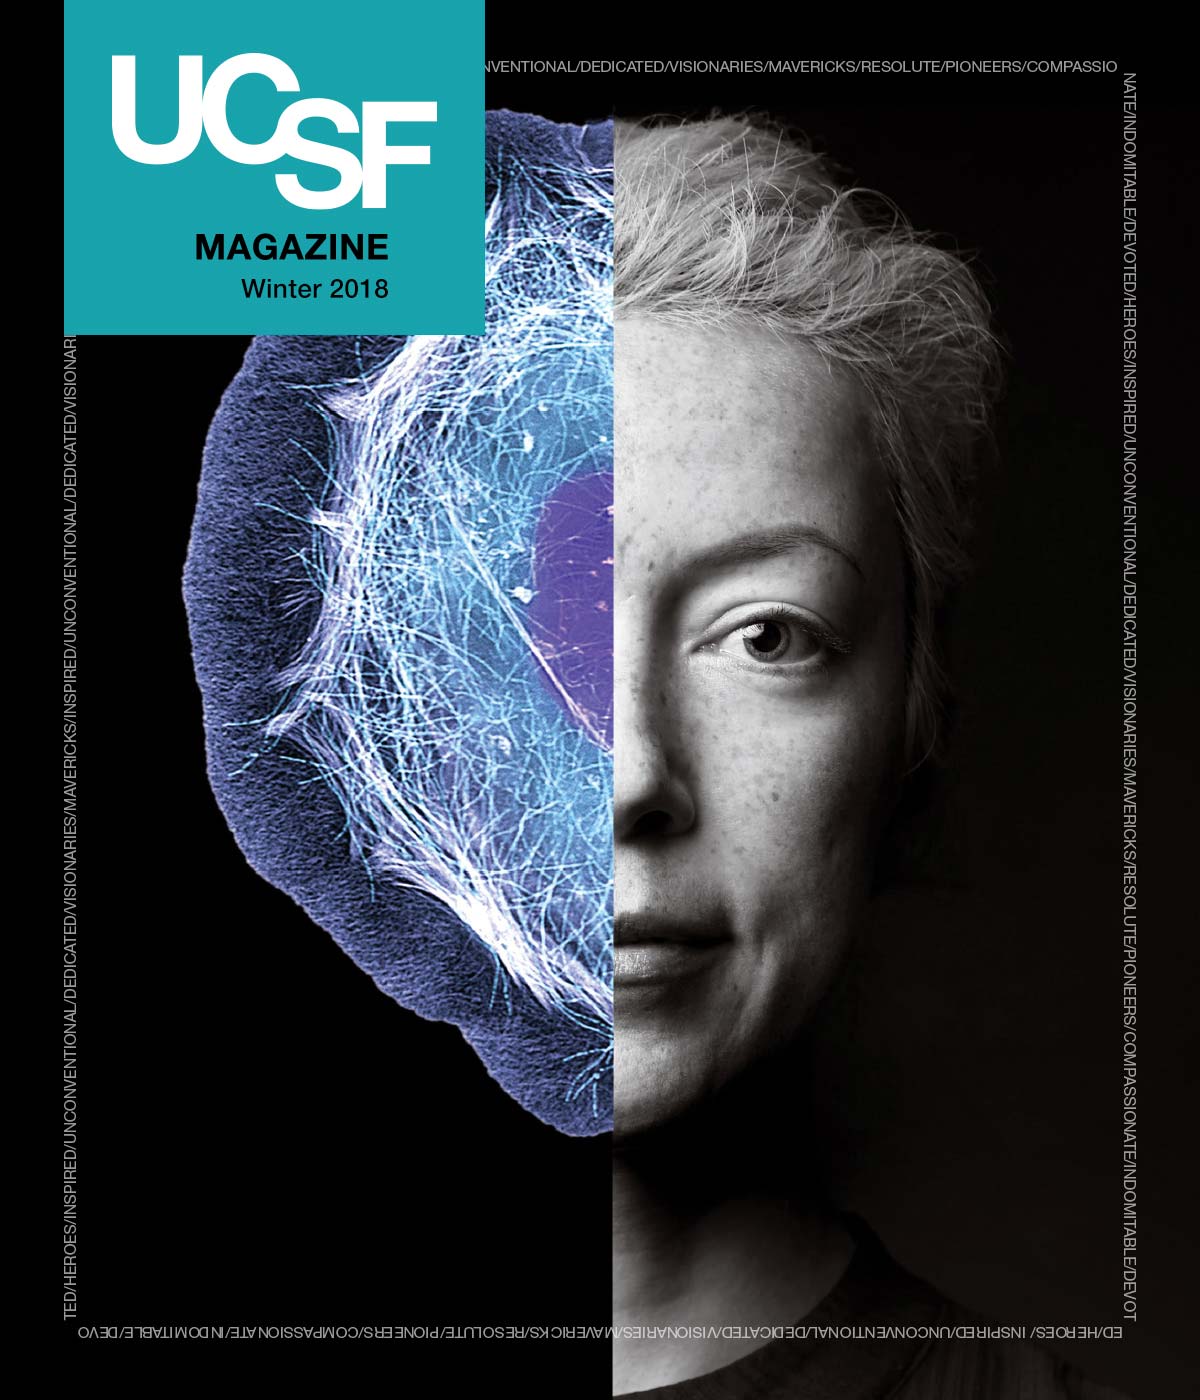 Cover of UCSF Magazine: left corner reads “UCSF Magazine, Winter 2018”. Black background with a photo slit in half: the right half is a black and white portrait of a female scientist, the left half is a colorful cell image.